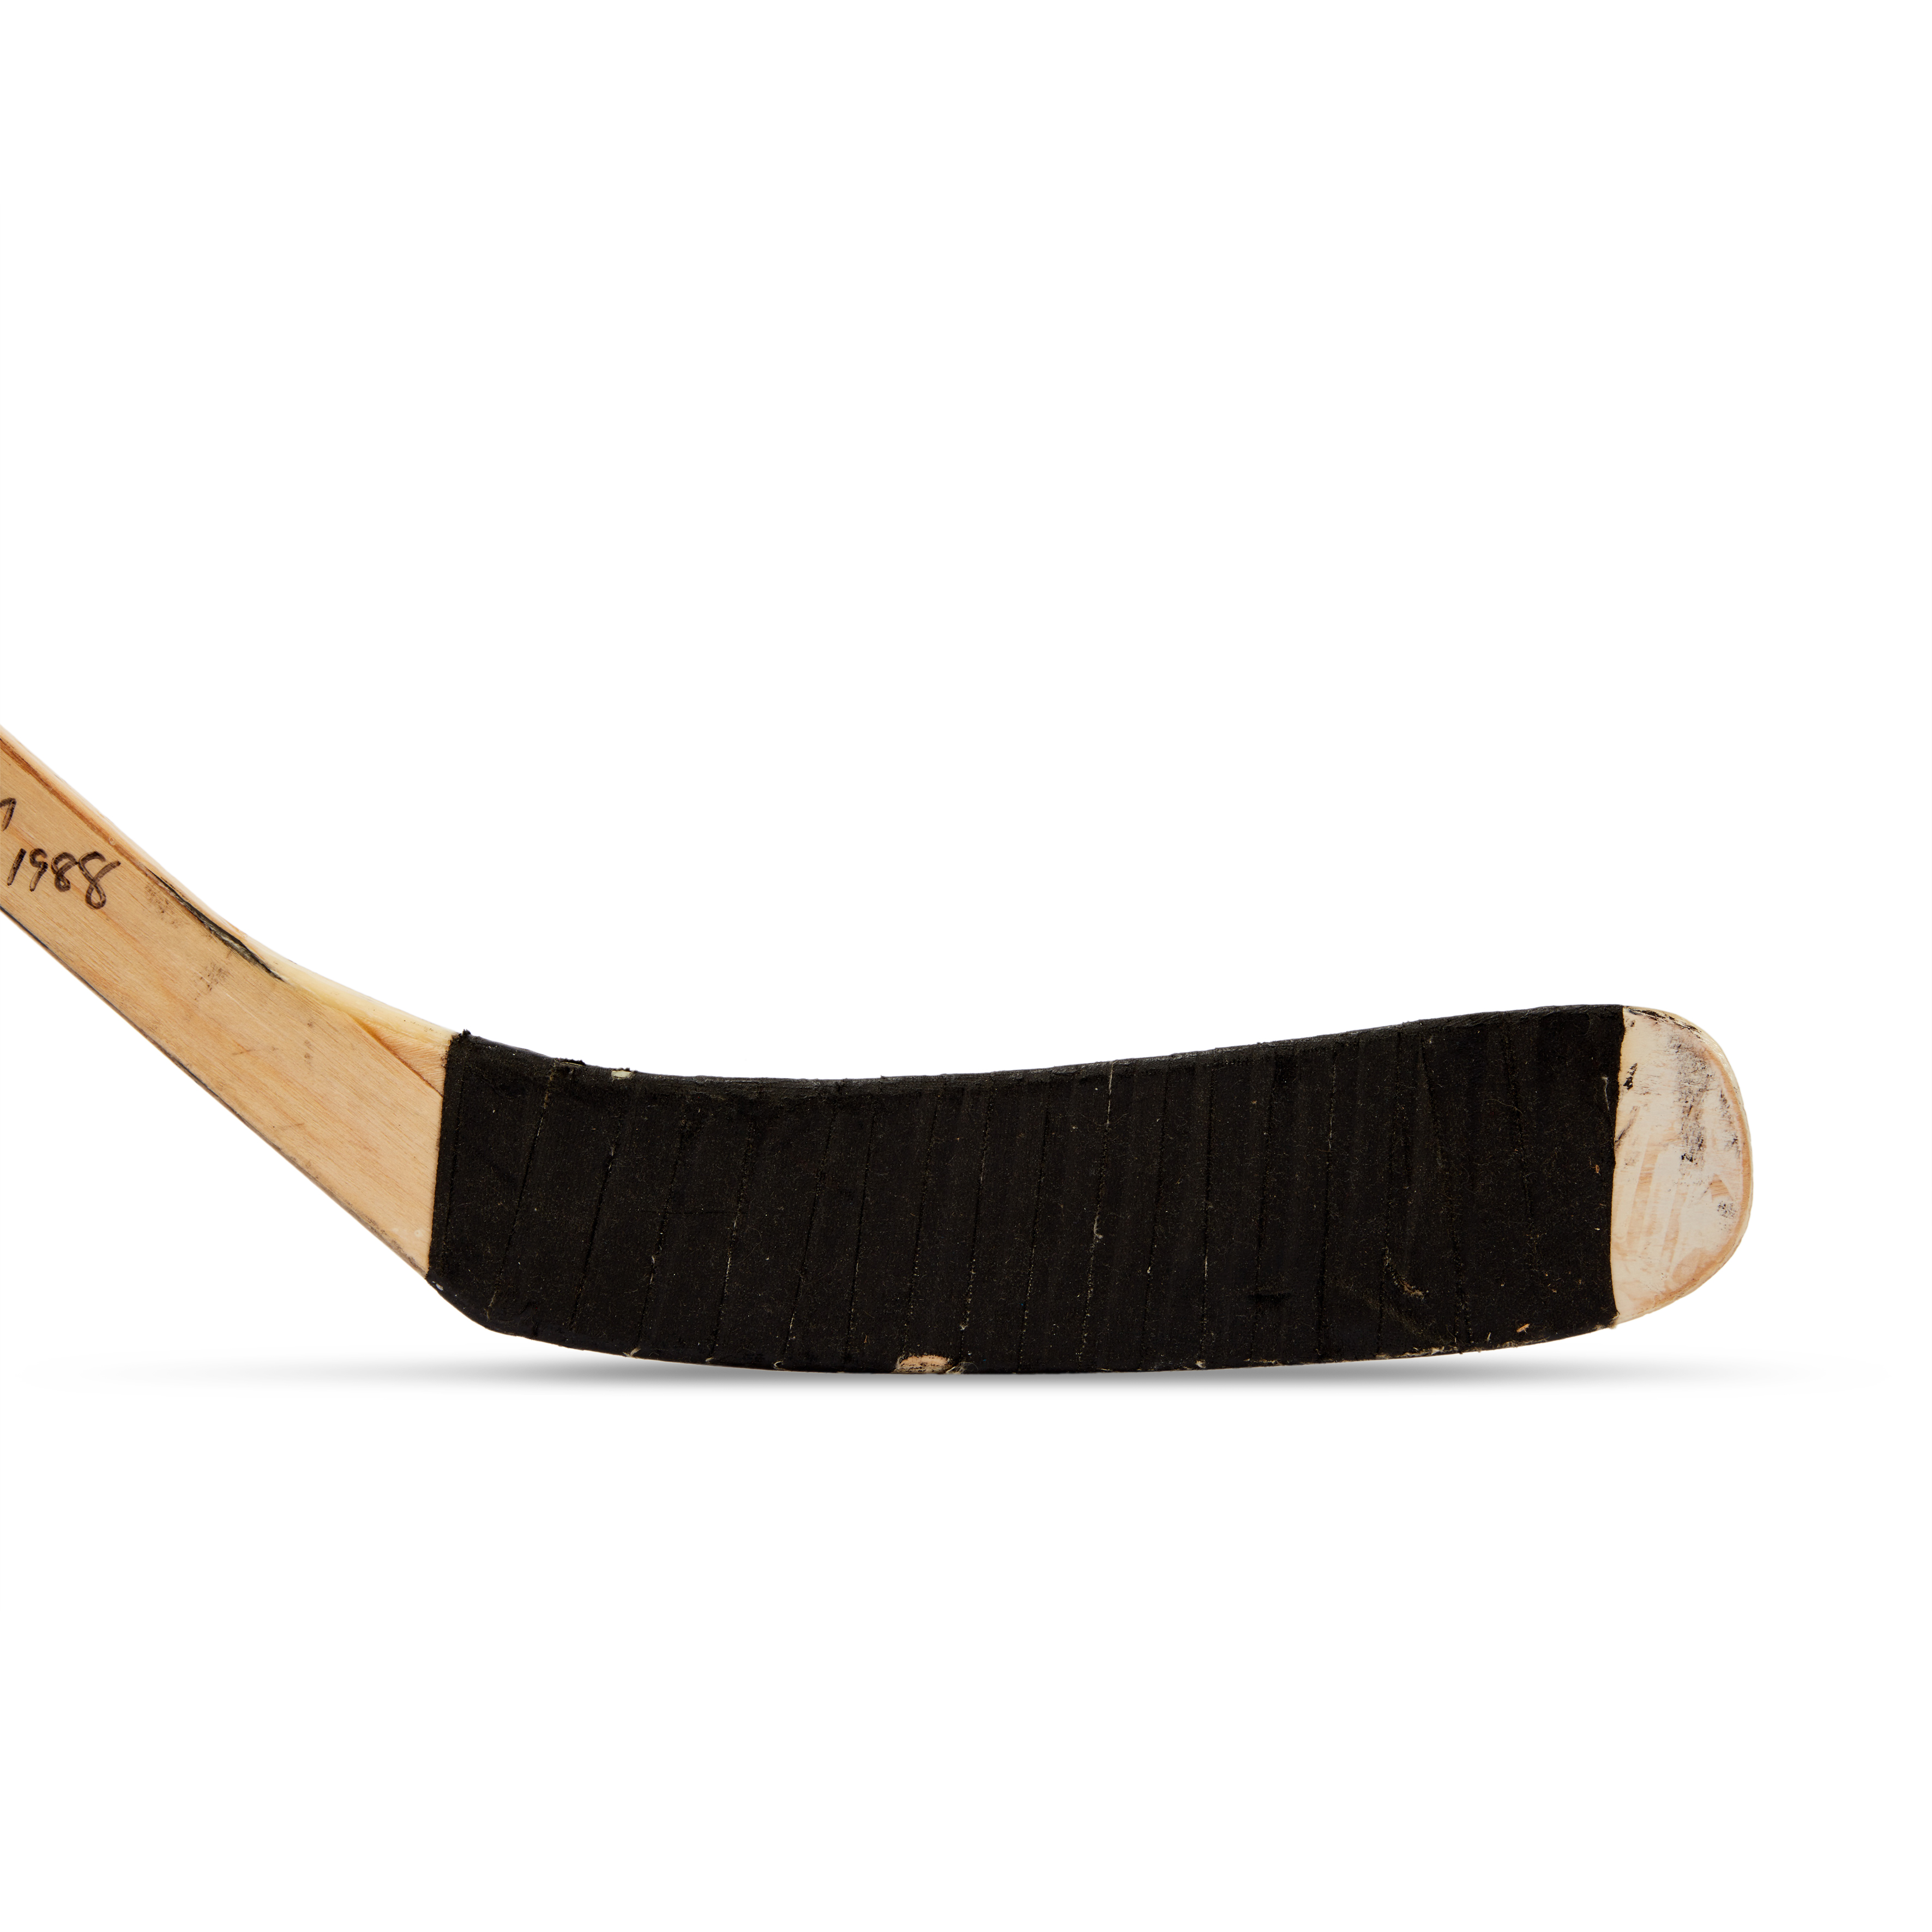 Gretzky 1988 Stanley Cup final stick up for auction